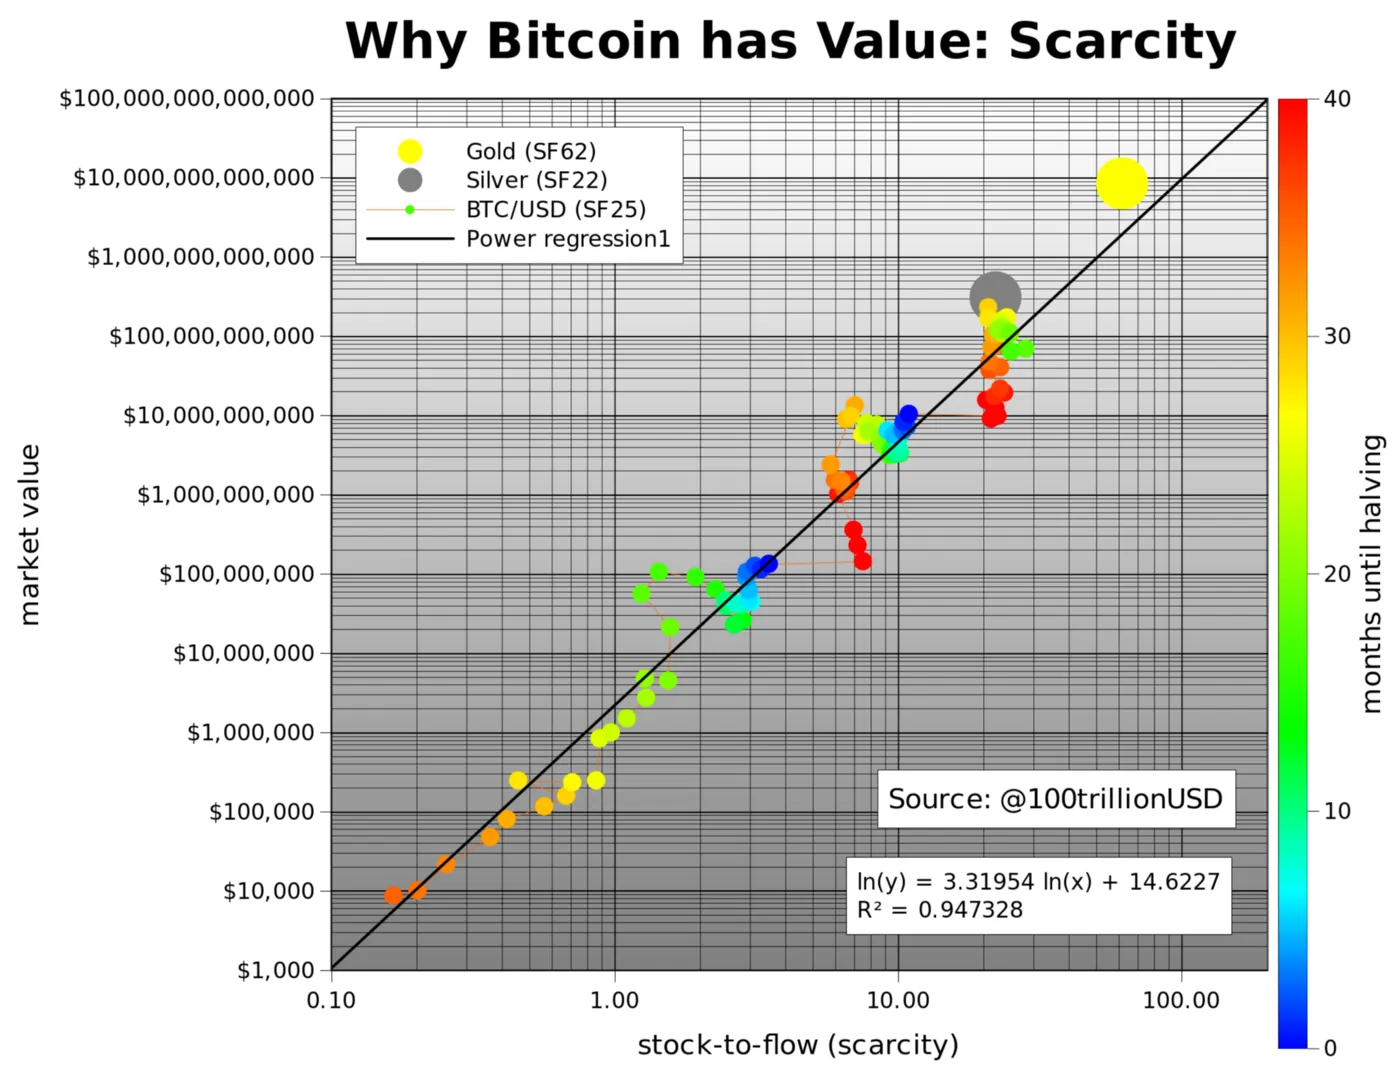 Source: Modeling Bitcoin’s Value With Scarcity 